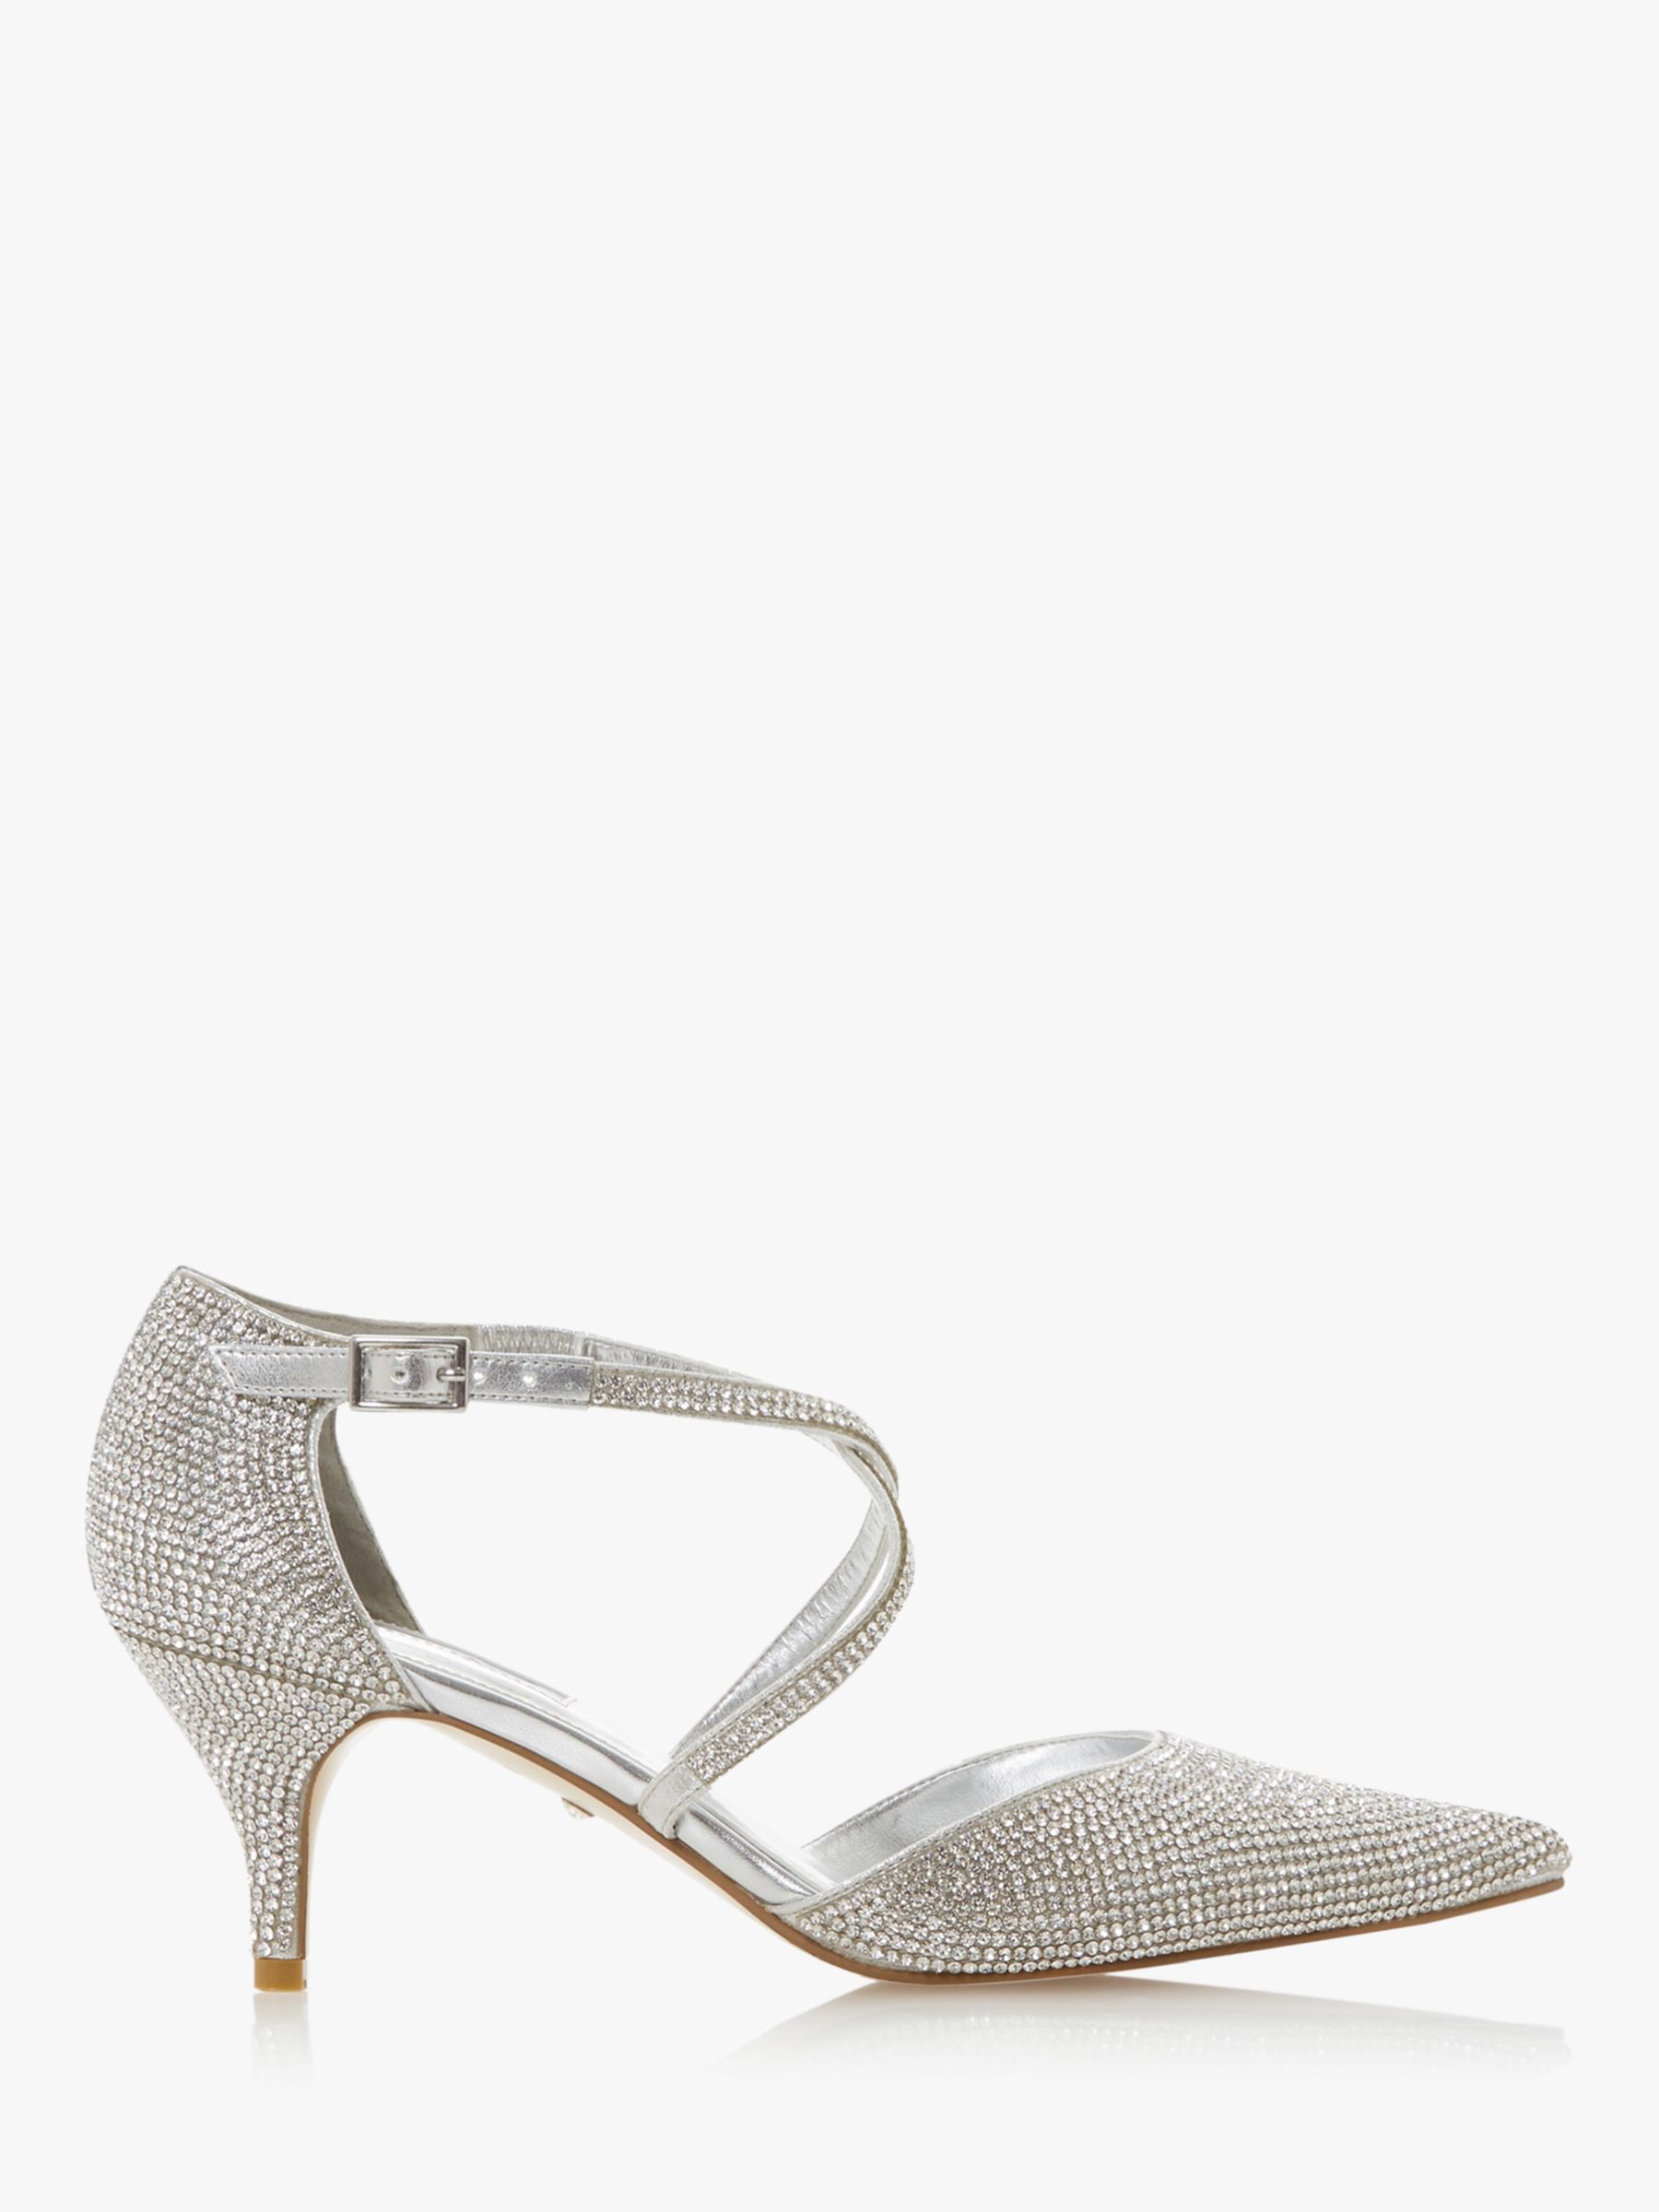 Occasion Shoes Party Shoes | John Lewis & Partners